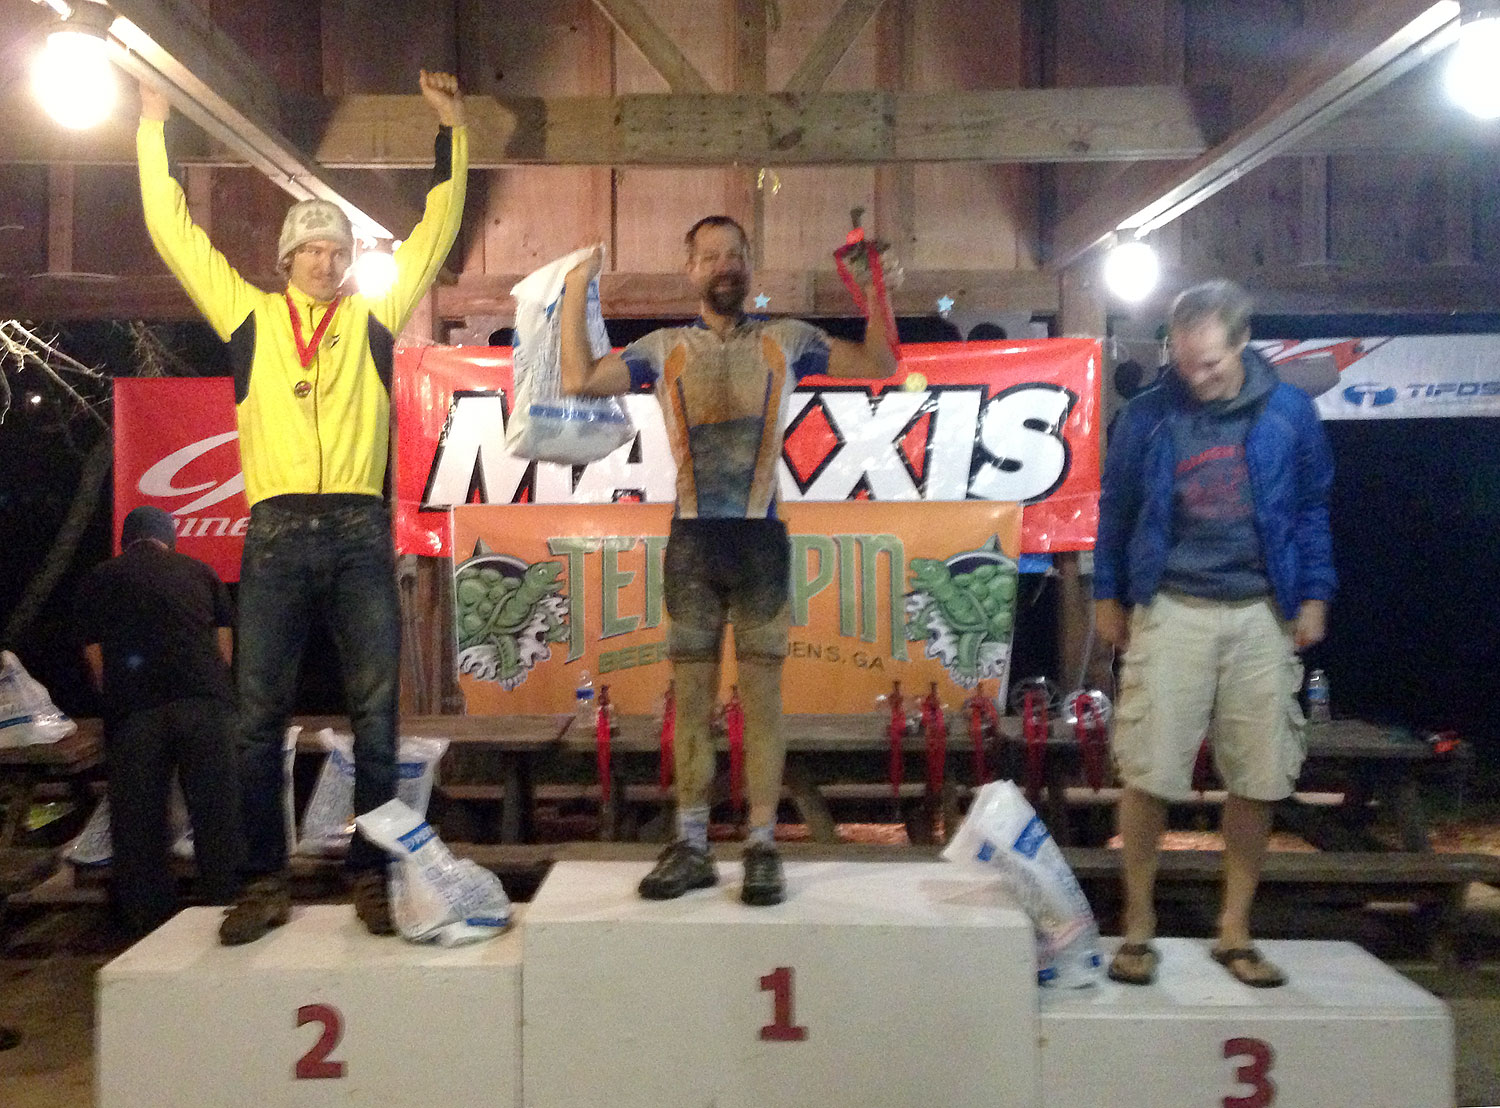 Solo expert podium - (left to right) - Tyler Murch, Brian Toone, Darby Benson